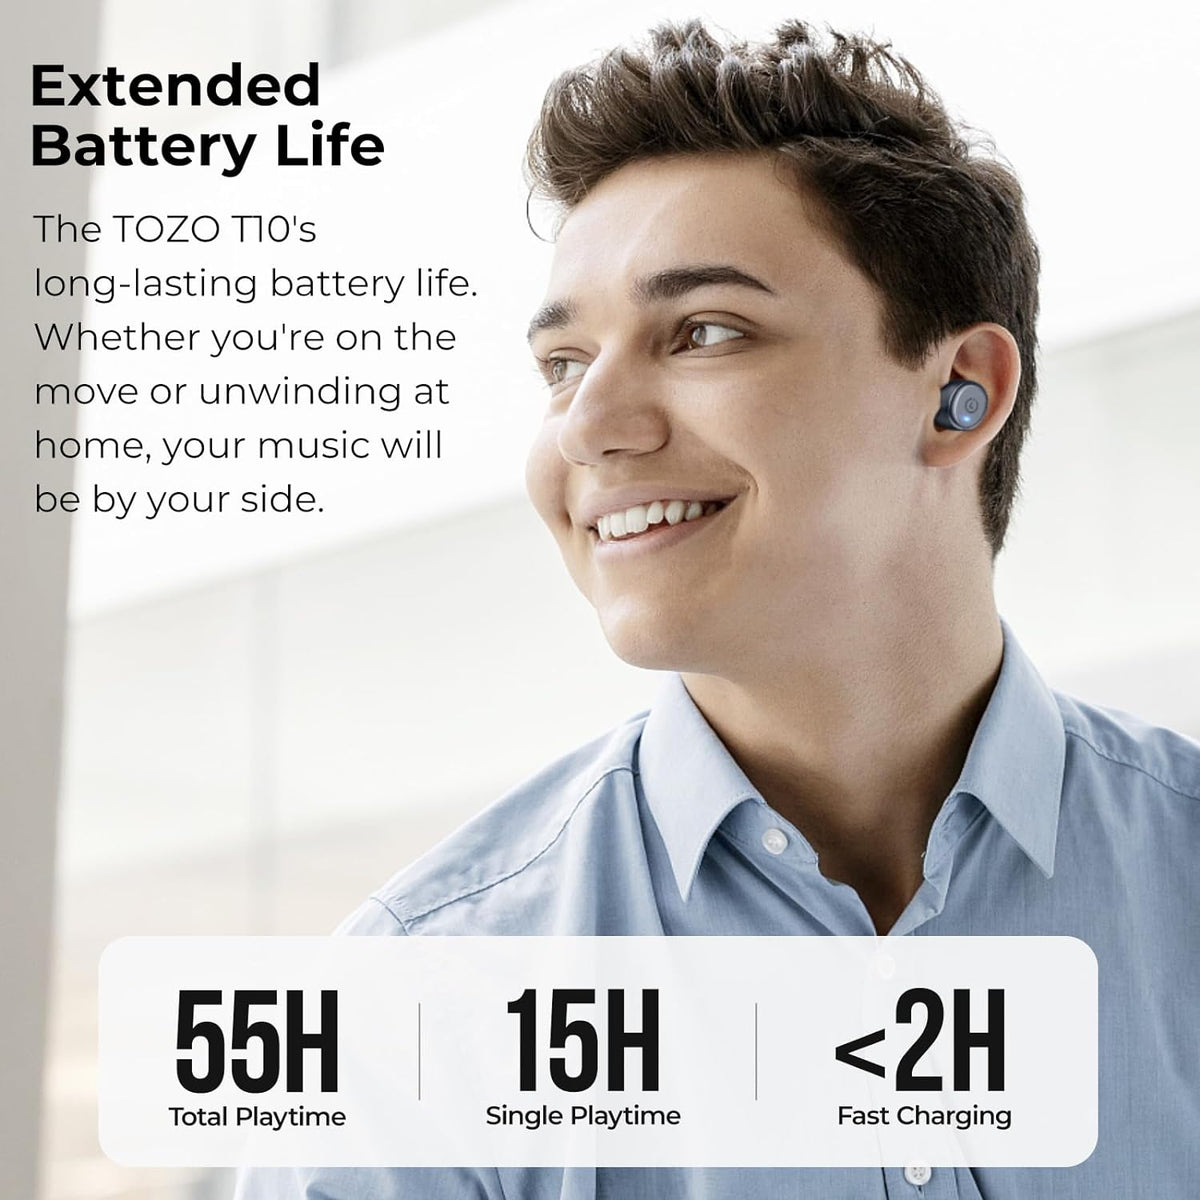 The Tozo T10 waterproof ear buds with millions of TikTok views are reduced  to $18.99 on